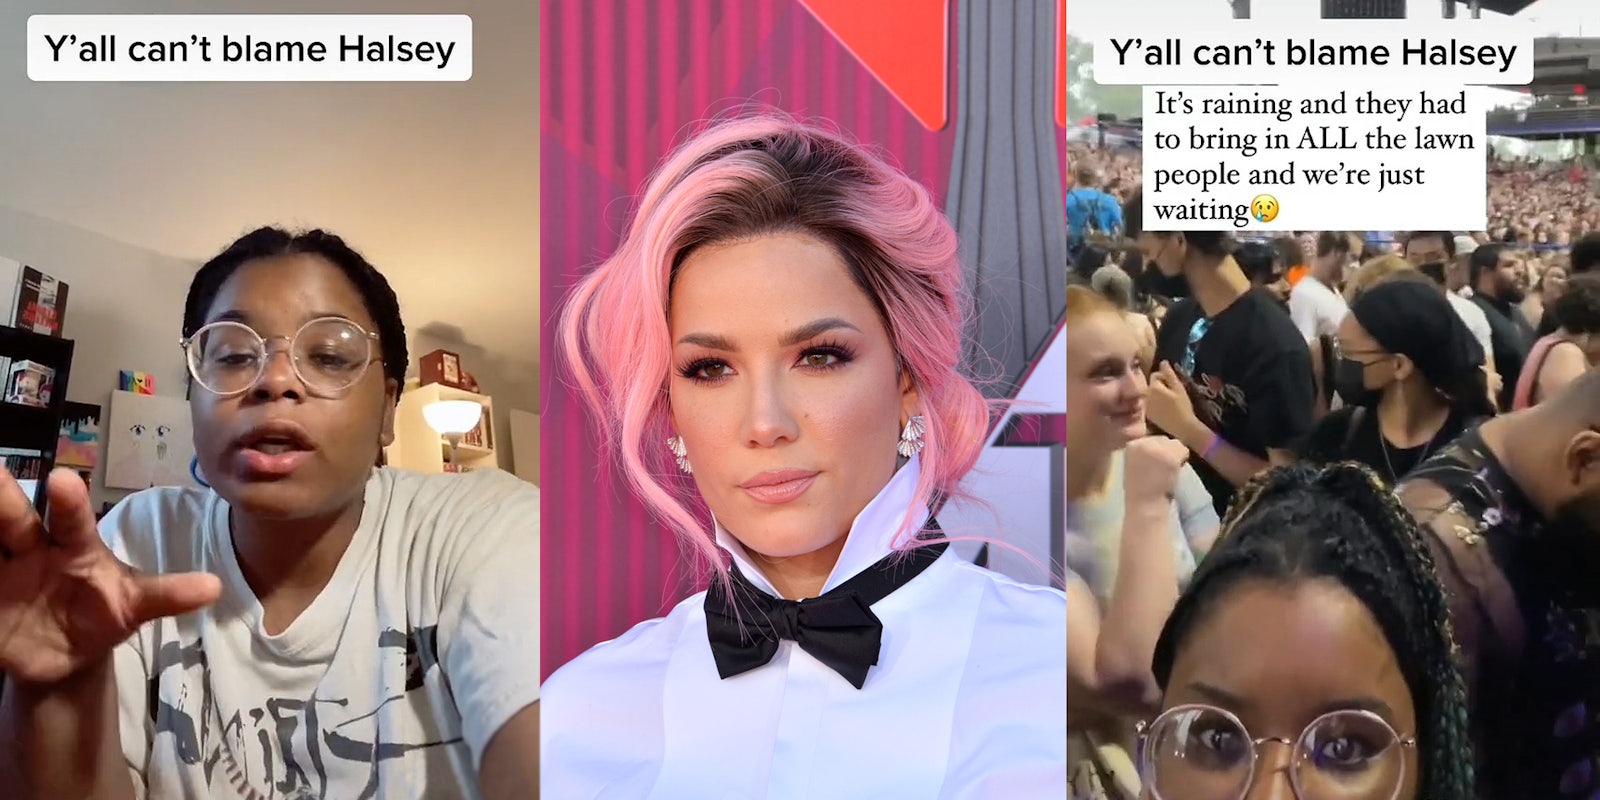 woman speaking caption 'Y'all can't blame Halsey' (l) Halsey on pink stripped background (c) woman greenscreen tiktok caption 'Y'all can't blame Halsey' 'It's raining and they had to bring in ALL the lawn people and we're just waiting' (r)